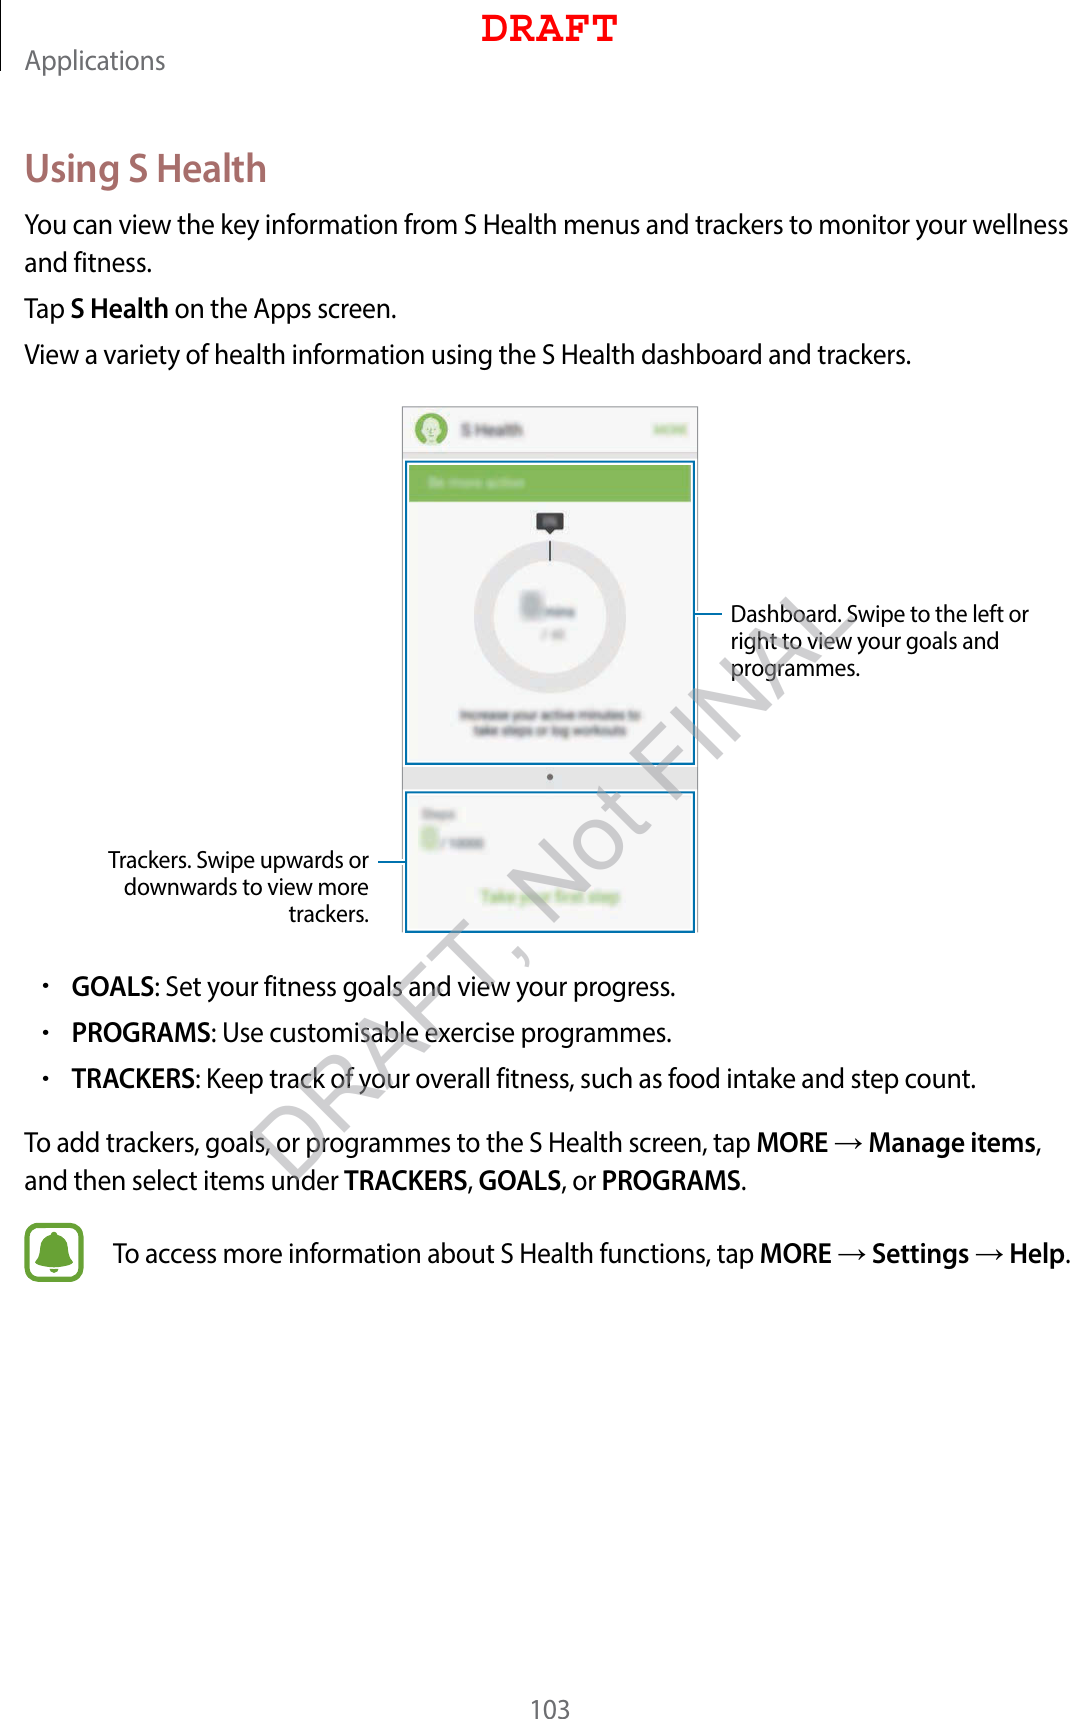 Applications103Using S HealthYou can view the key information from S Health menus and trackers to monitor your wellness and fitness.Tap S Health on the Apps screen.View a variety of health information using the S Health dashboard and trackers.Trackers. Swipe upwards or downwards to view more trackers.Dashboard. Swipe to the left or right to view your goals and programmes.•GOALS: Set your fitness goals and view your progress.•PROGRAMS: Use customisable exercise programmes.•TRACKERS: Keep track of your overall fitness, such as food intake and step count.To add trackers, goals, or programmes to the S Health screen, tap MORE  Manage items, and then select items under TRACKERS, GOALS, or PROGRAMS.To access more information about S Health functions, tap MORE  Settings  Help.DRAFTDRAFT, Not FINAL